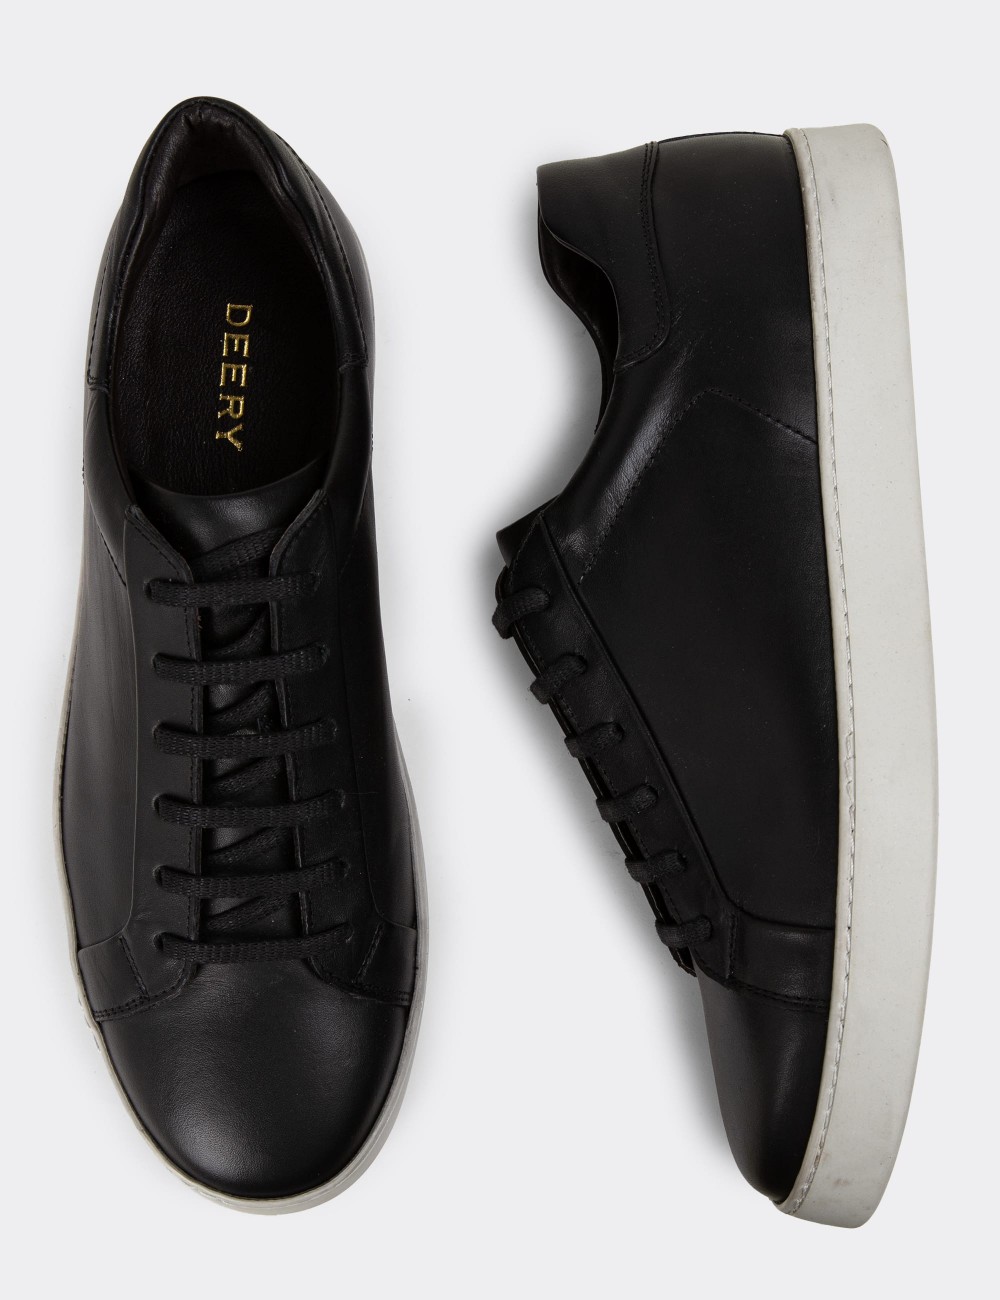 Black Leather Sneakers - 01955MSYHC02